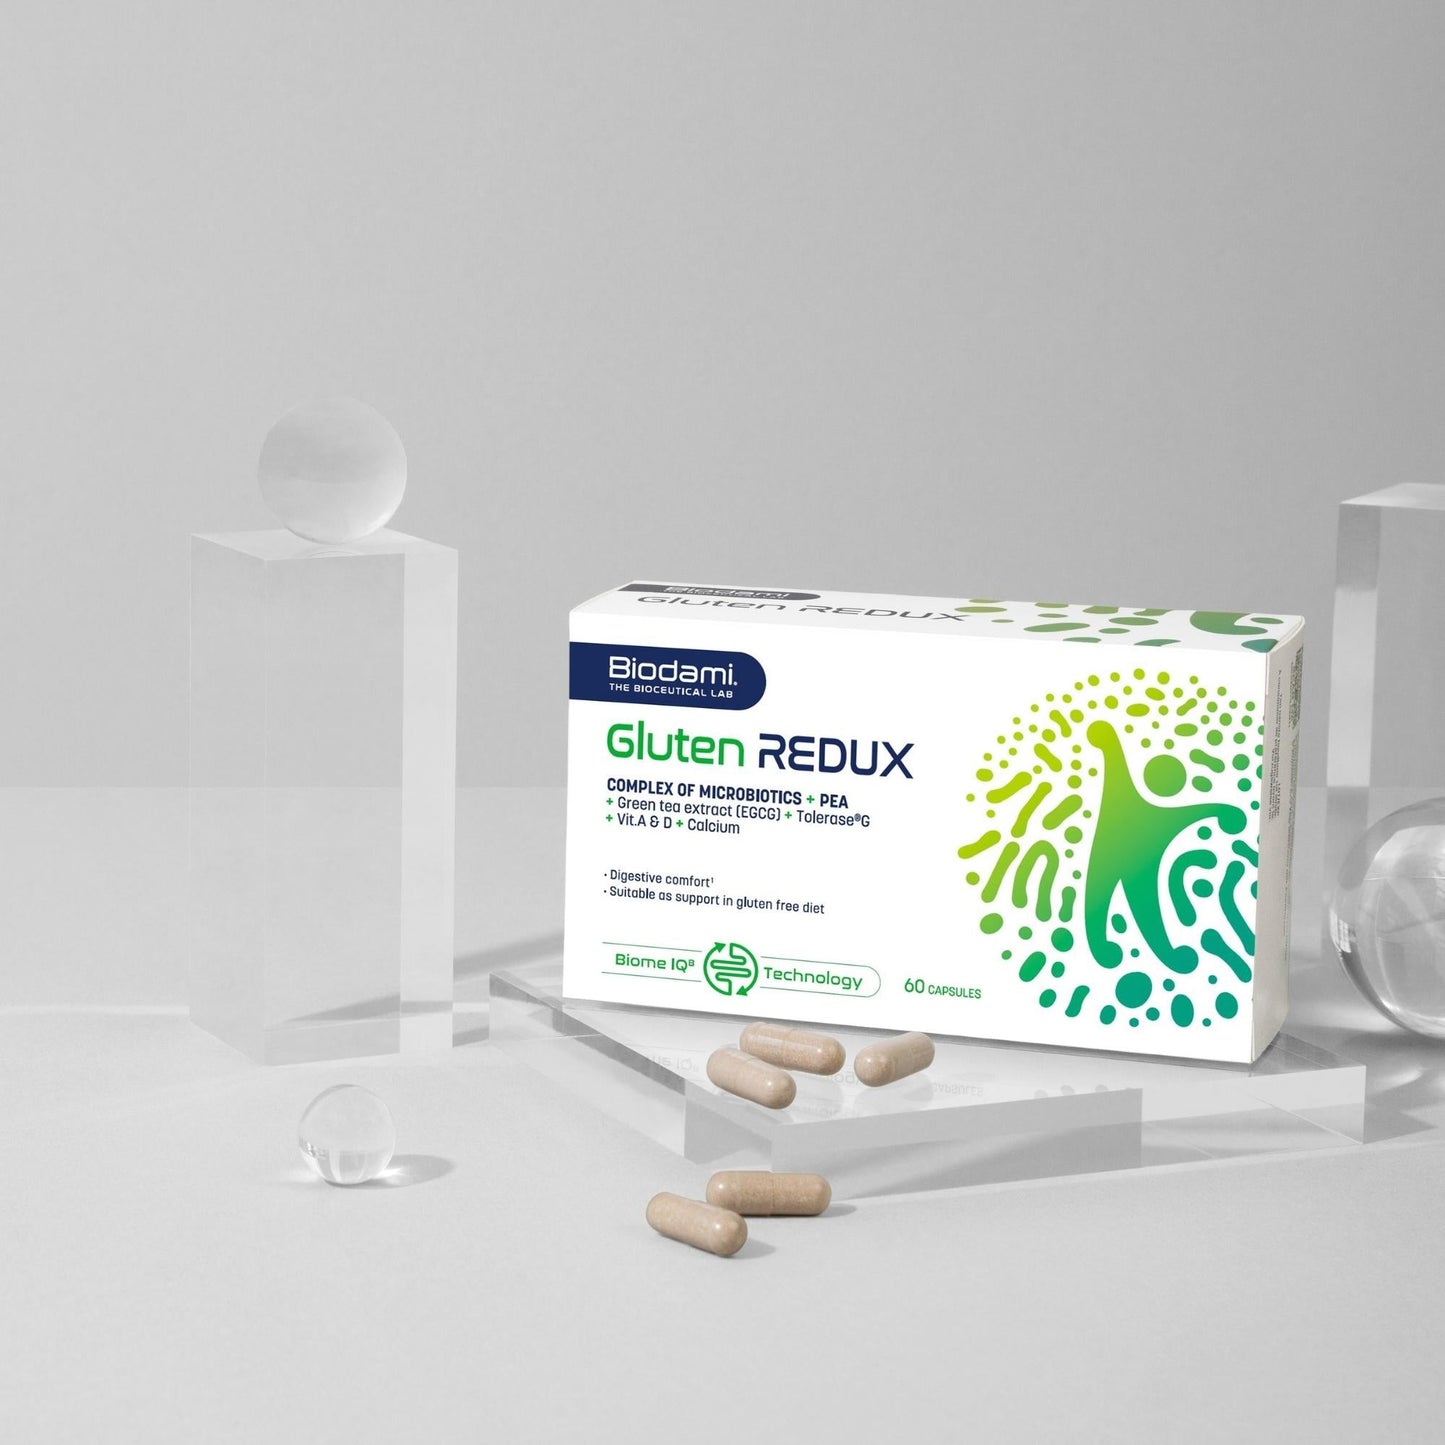 Pack shot of Gluten Redux. Complex of probiotics, PEA, green tea extract, gluten enzyme Tolerase G, vitamin A and D. For digestive support and gluten intolerance